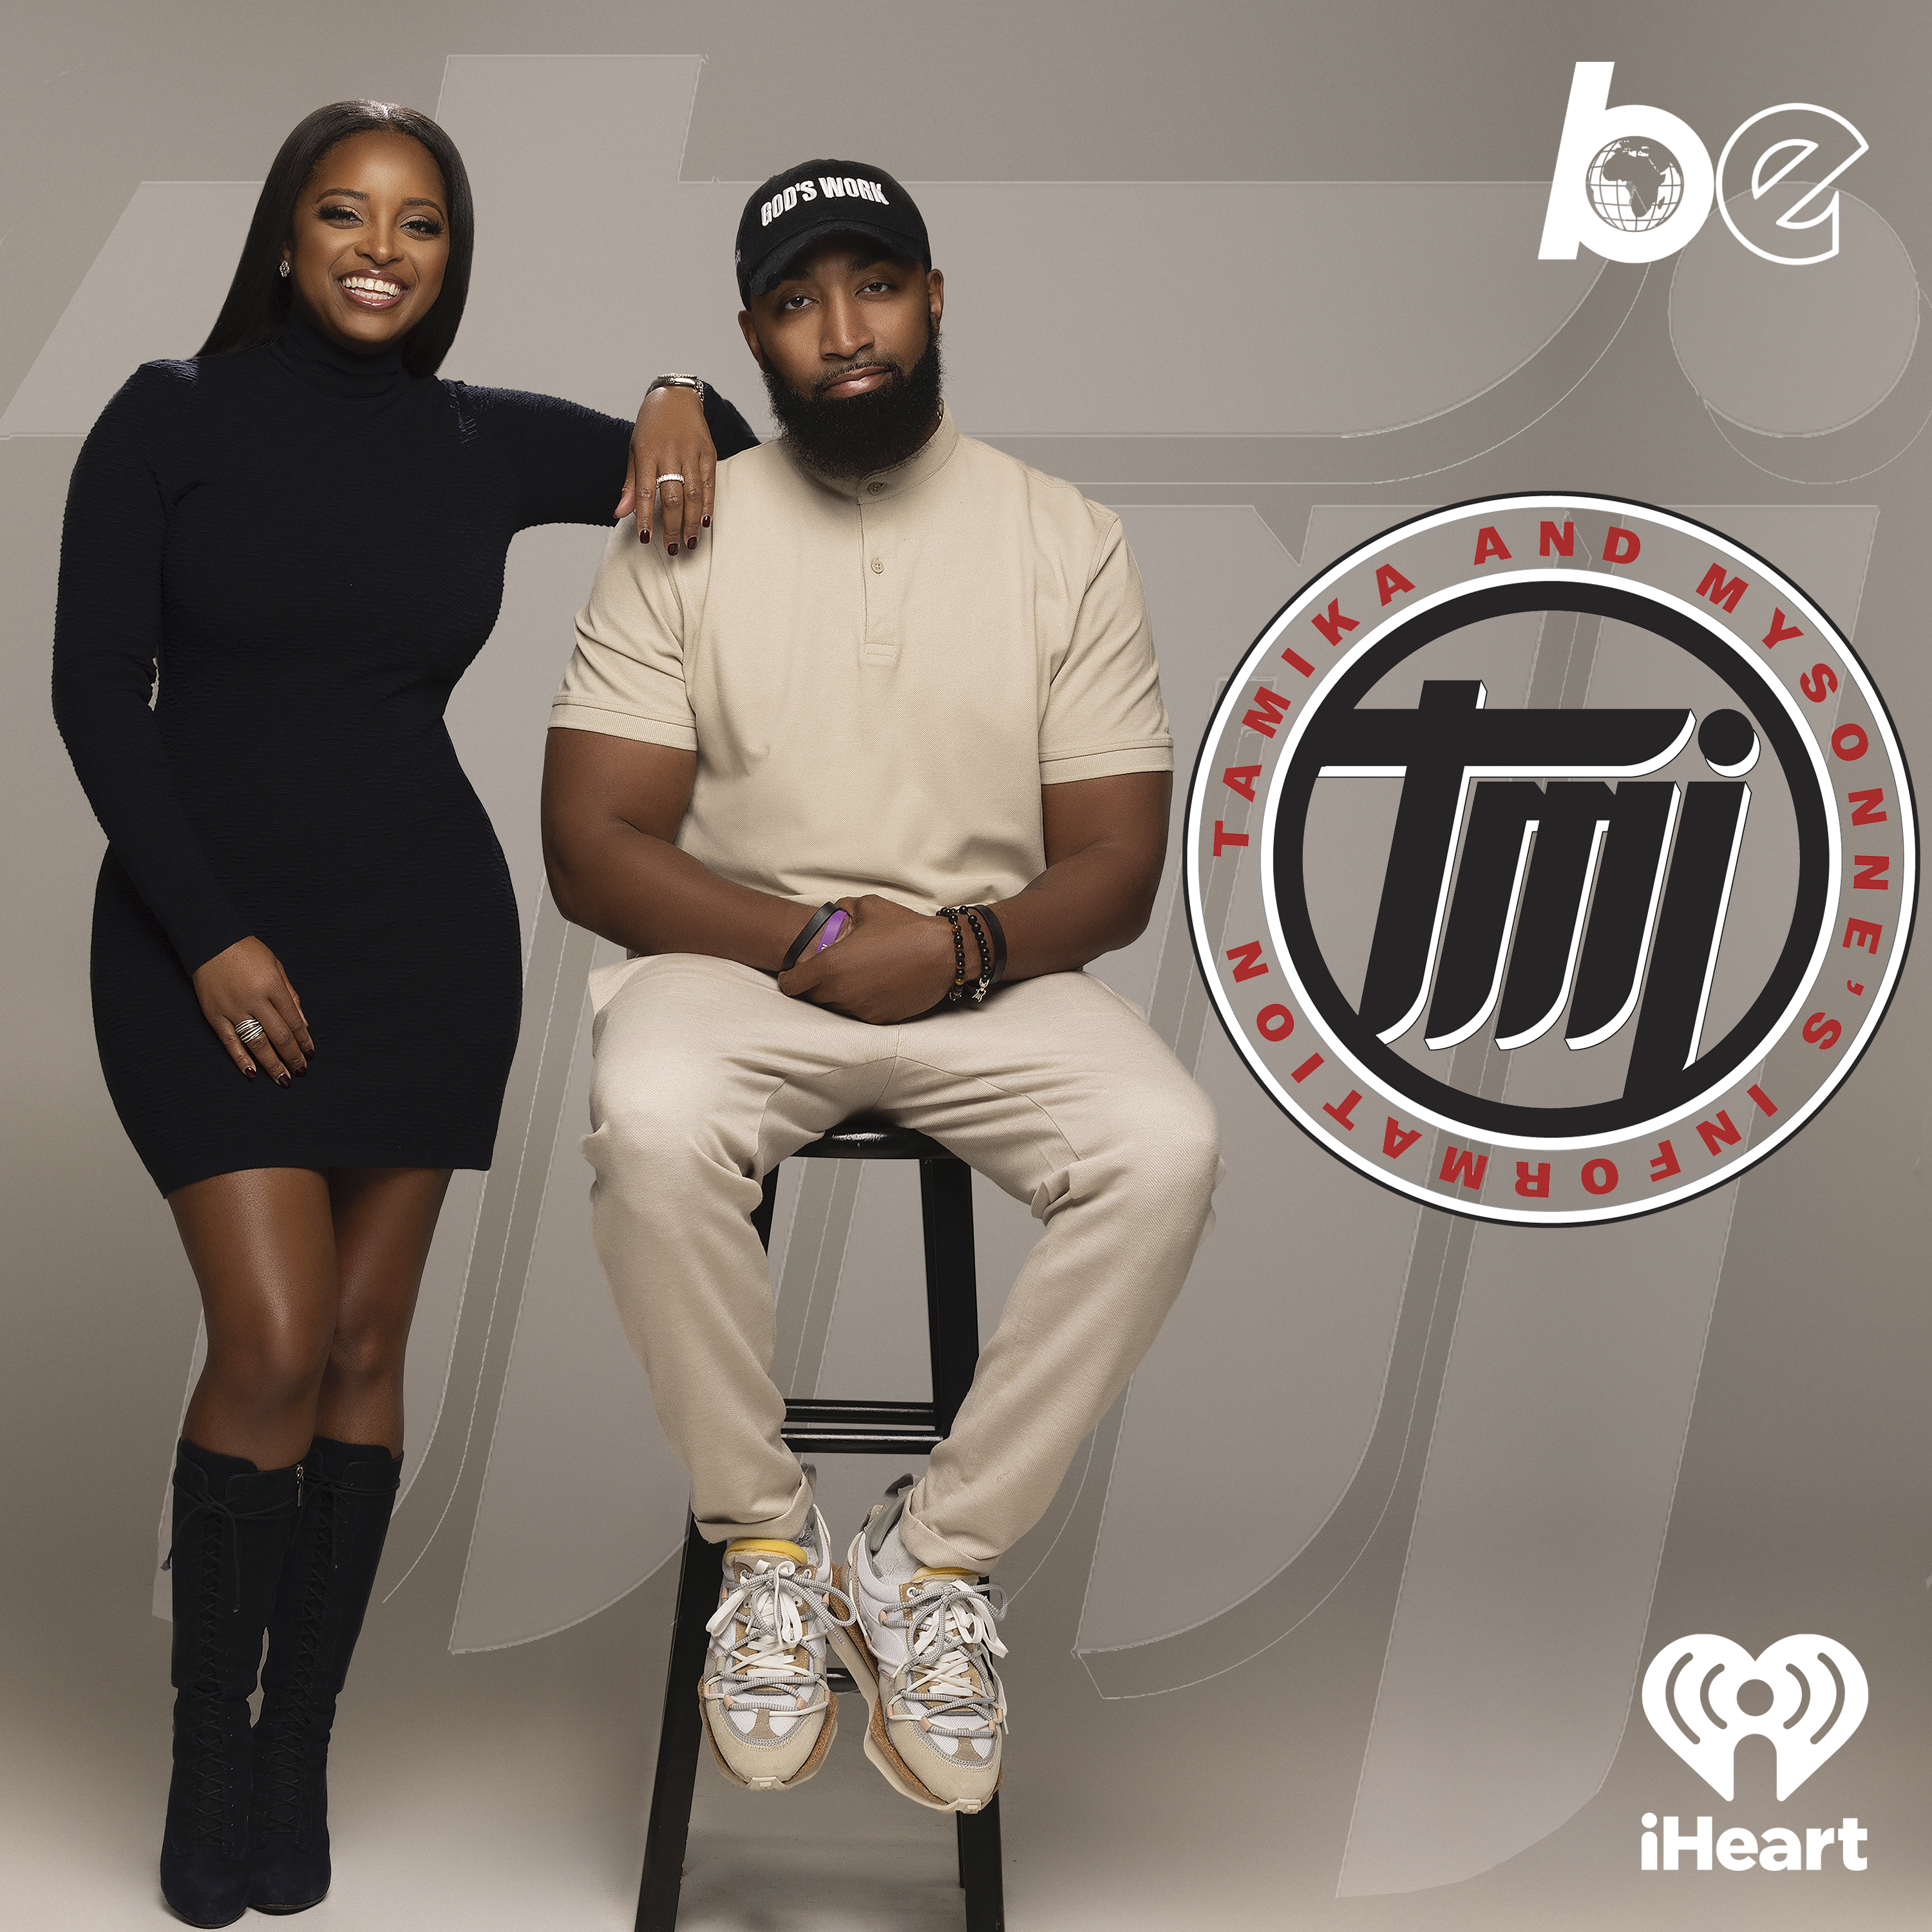 Justice is Not a Trend with Porsha Williams and Trae tha Truth